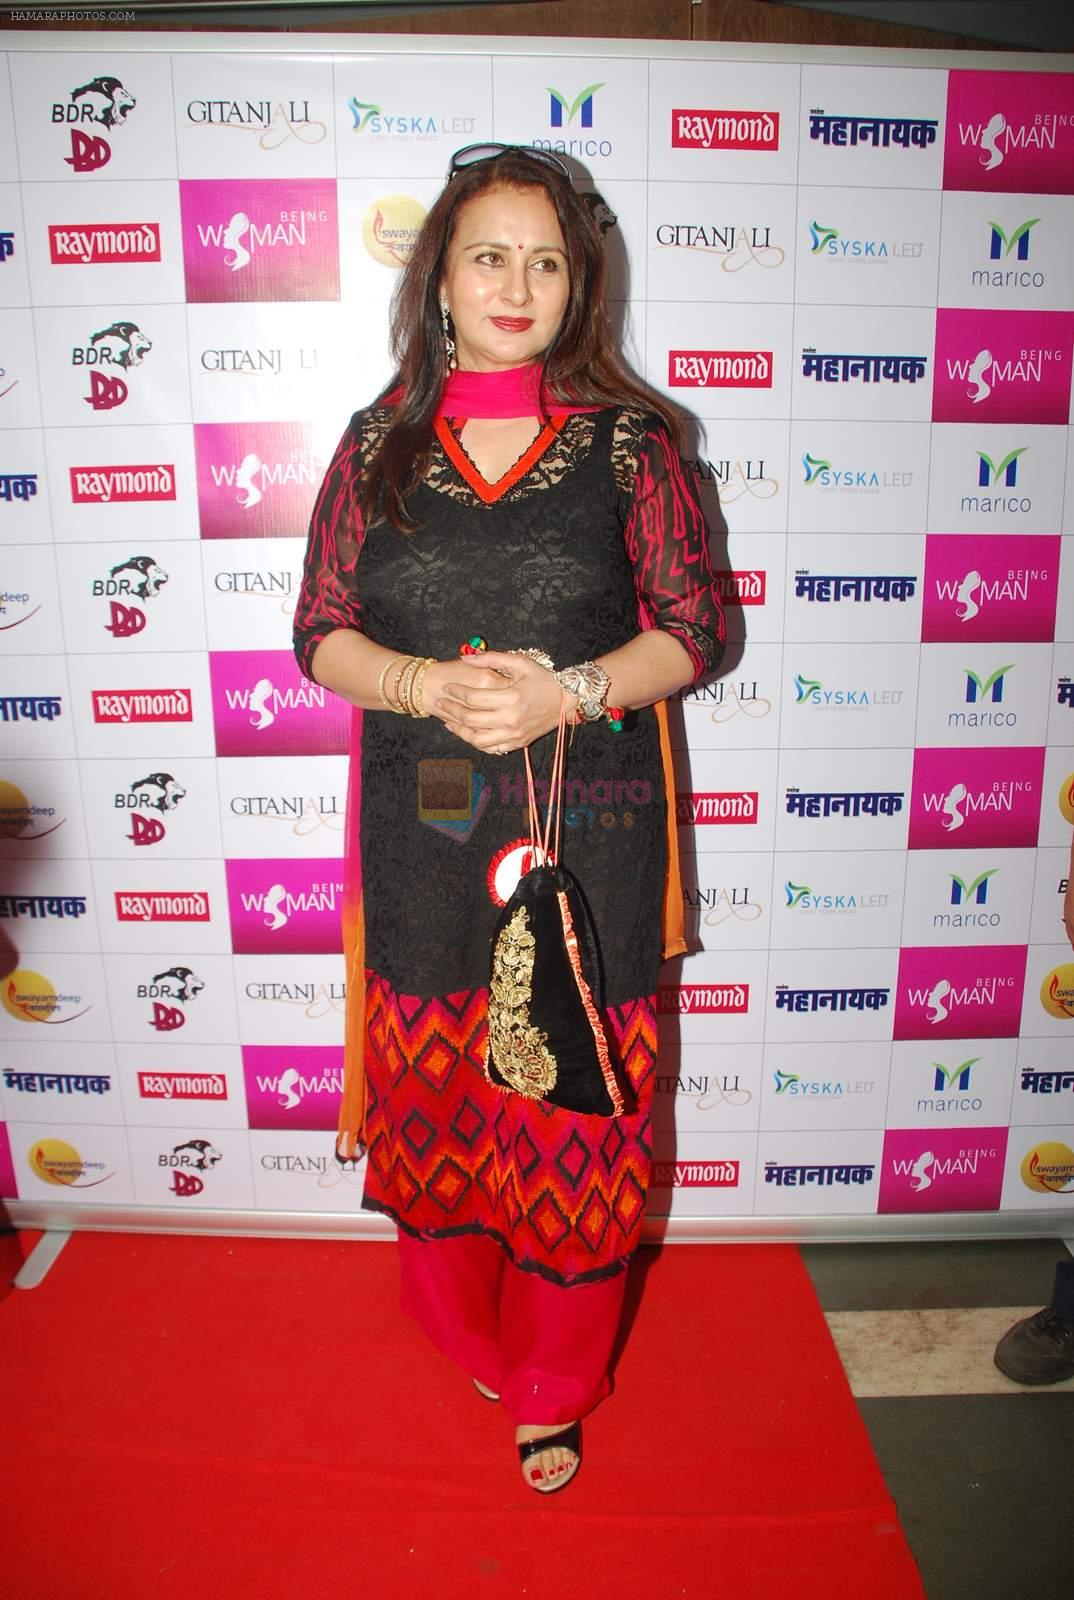 Poonam Dhillon at Being Woman event in Rangsharda on 8th March 2015